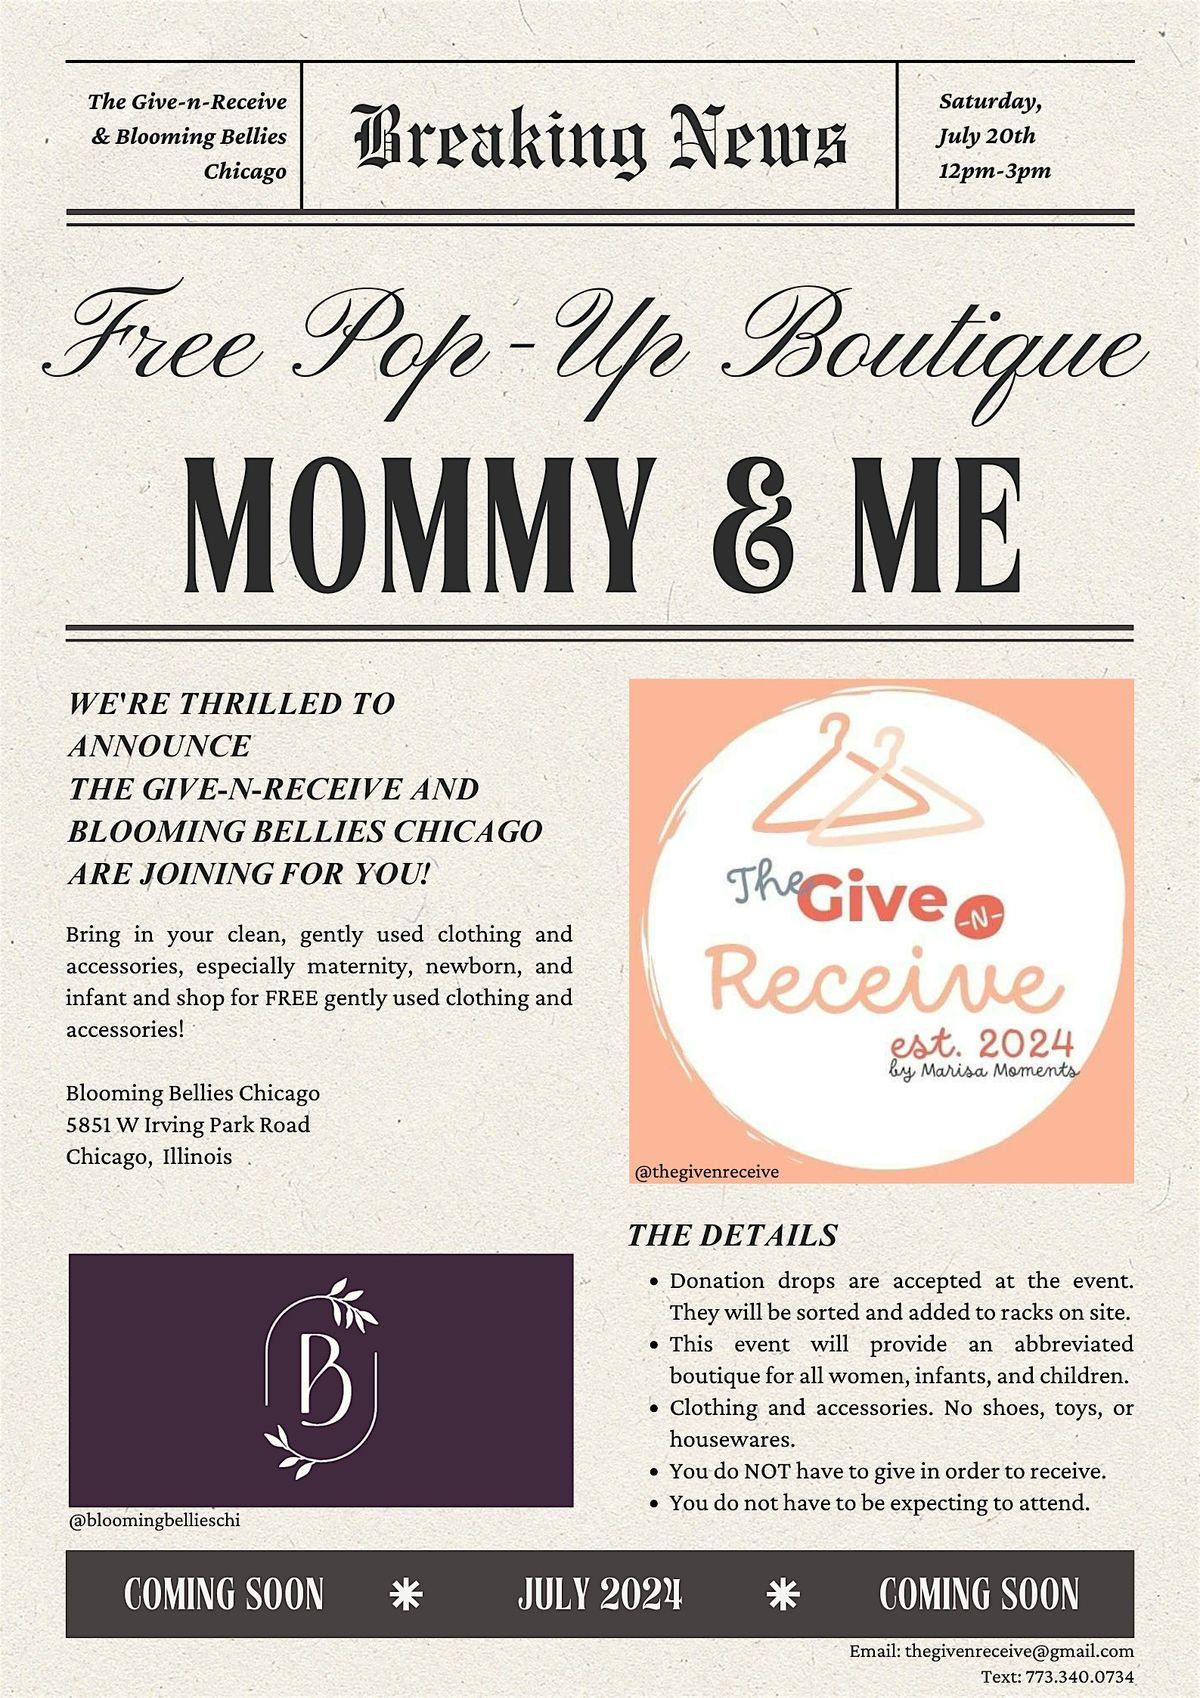 Mommy & Me: FREE Gently Used Clothing Pop-up Boutique